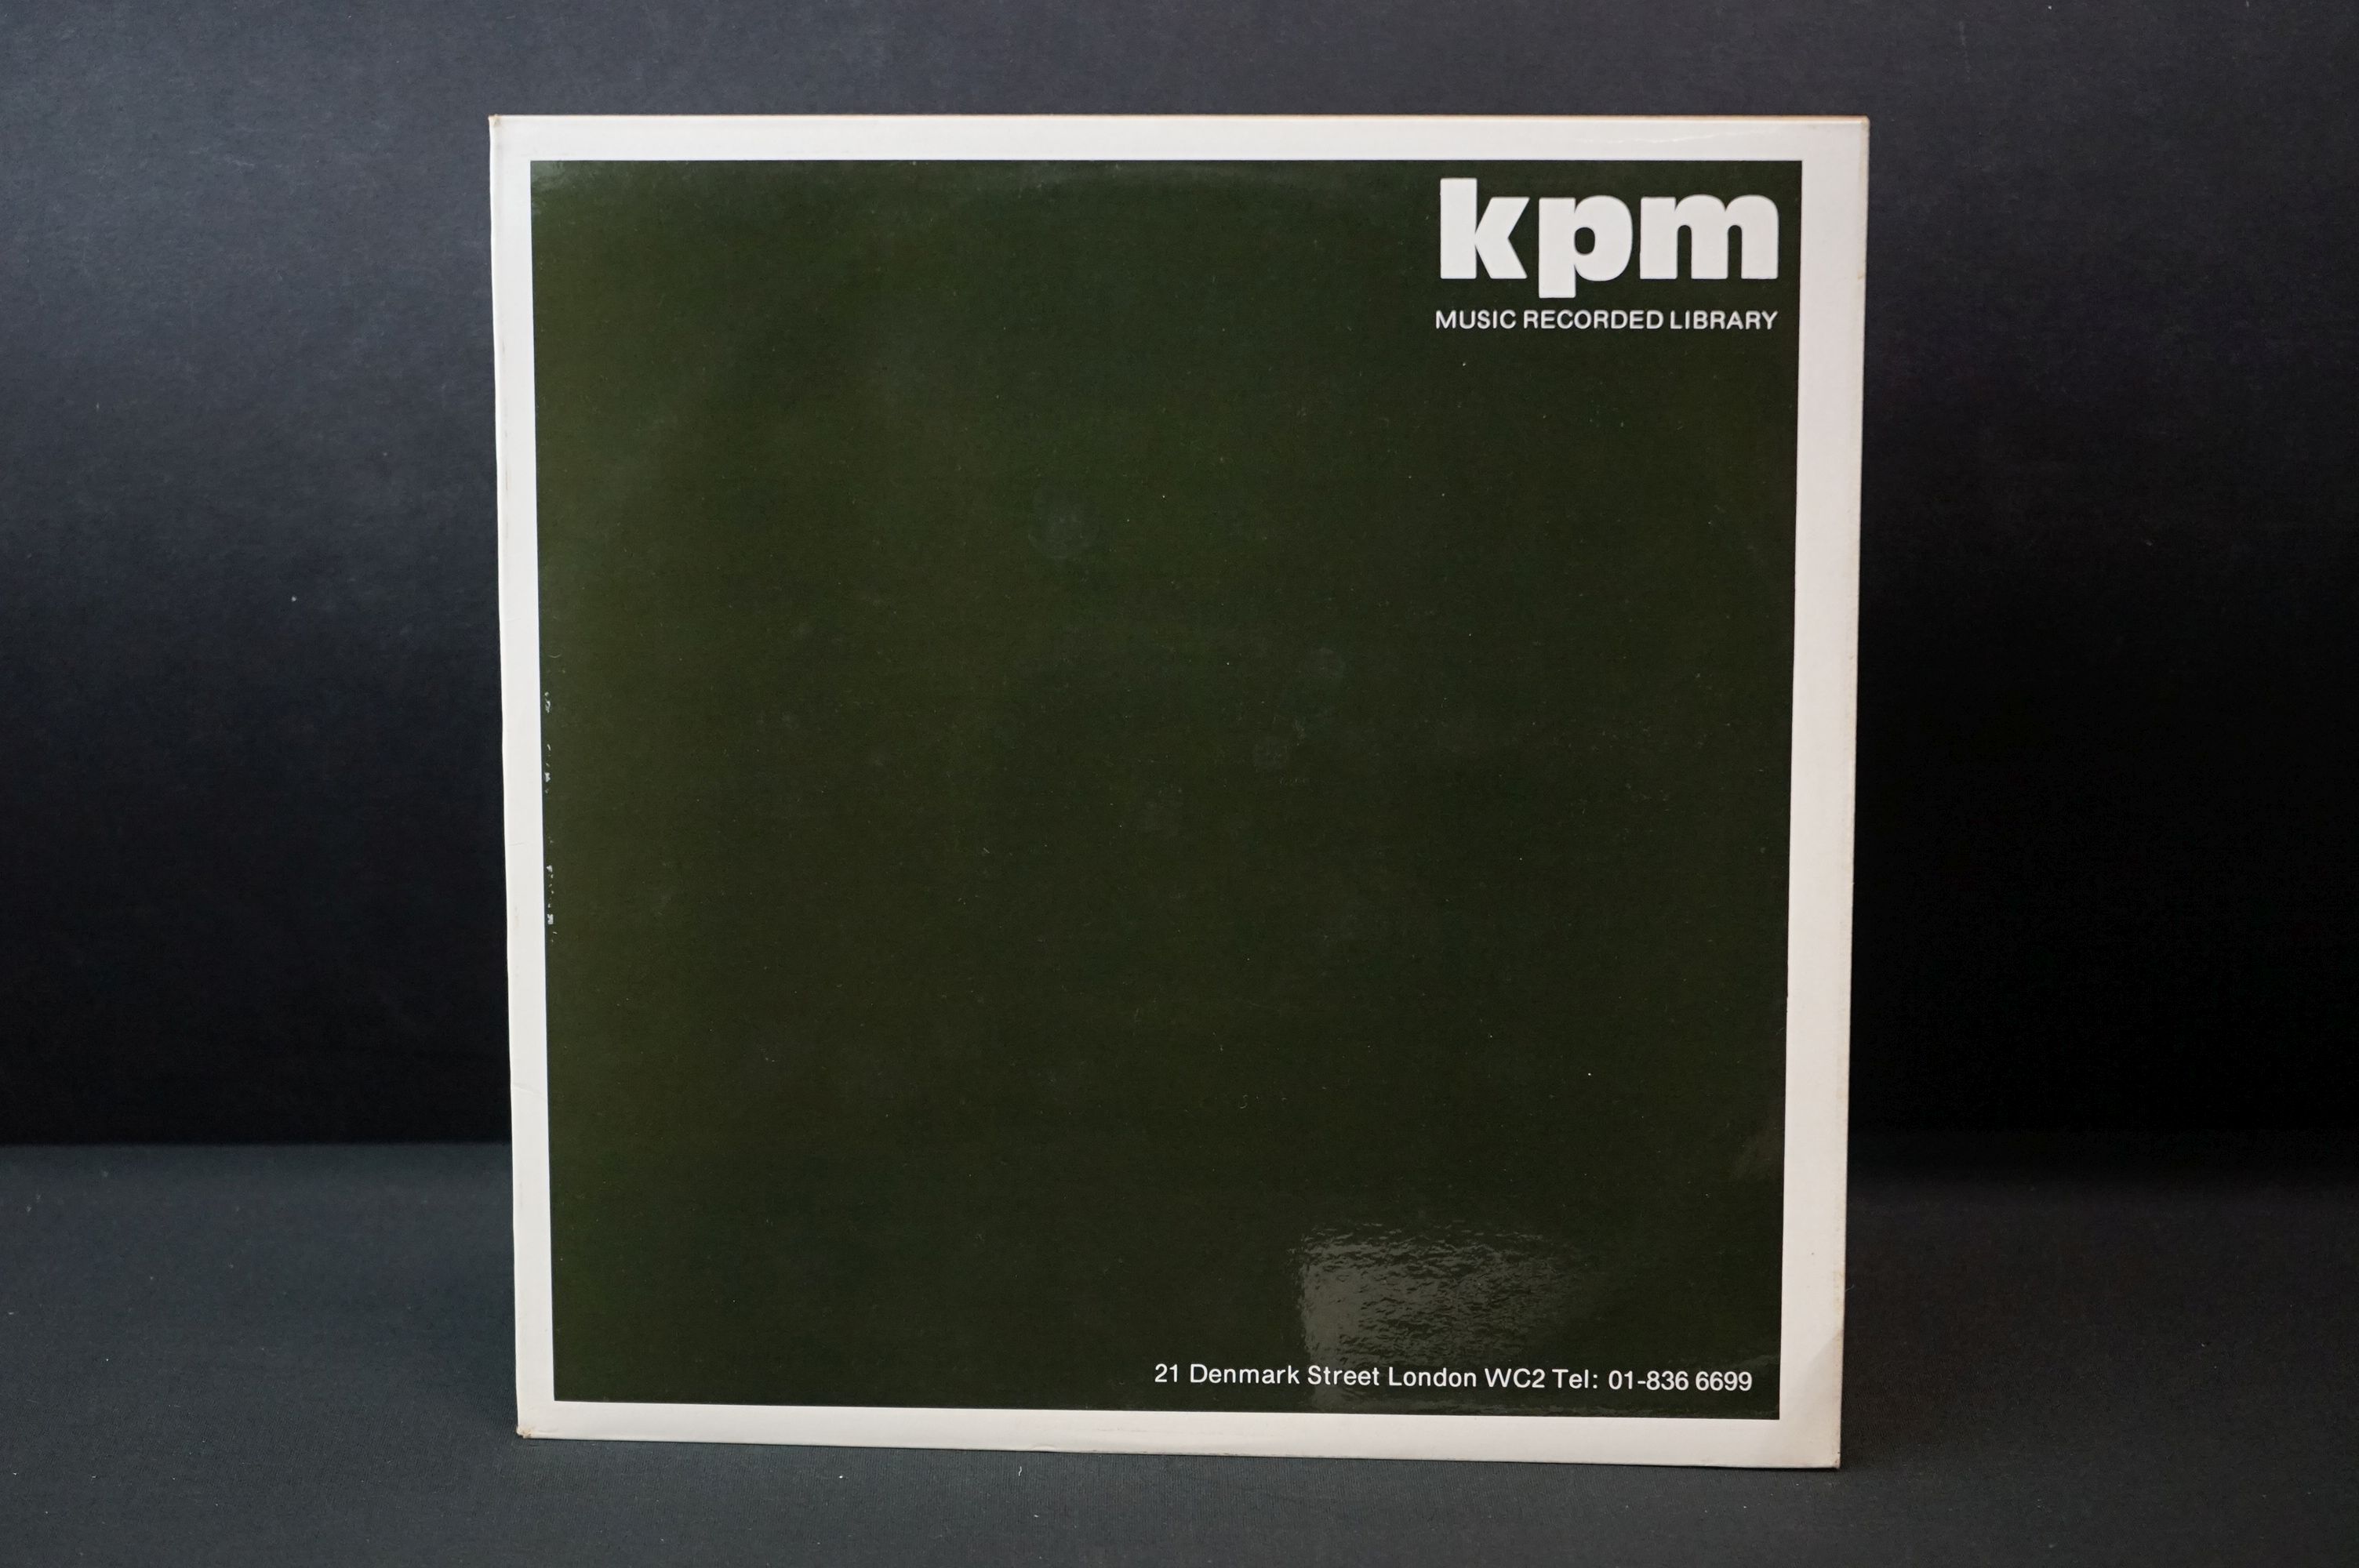 Vinyl - Vinyl - Library Music - KPM Music Recorded Library - Bass Guitar And Percussion Vol. 2